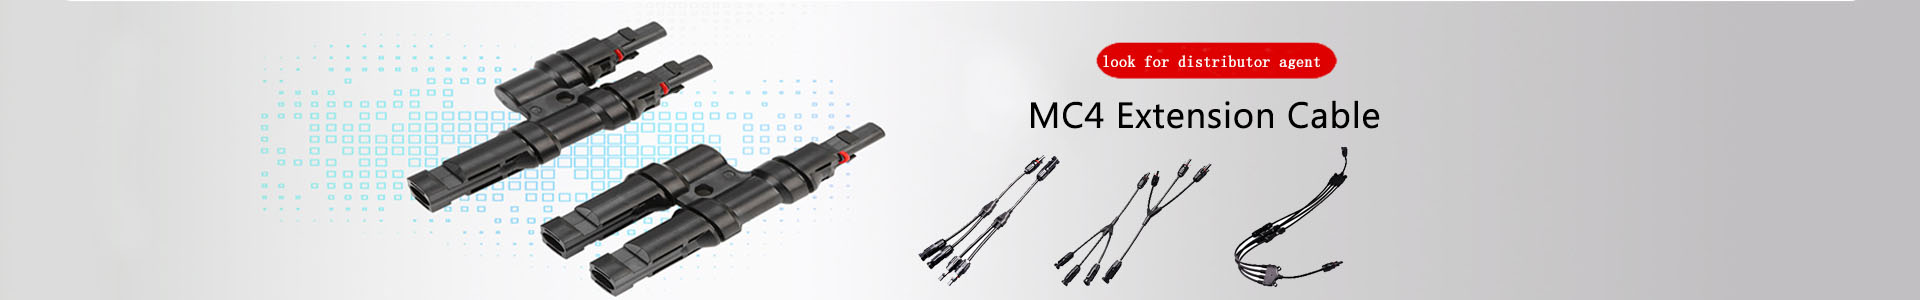 Mc4 solar connector instructions-Industry news-Solar | solar connector,solar branch connector,diode fuse connector,MC4 extnsion cable,H1Z2Z2 solar cable, UL4703 solar cable | Leading manufacturer and supplier of solar pv cables and connectors